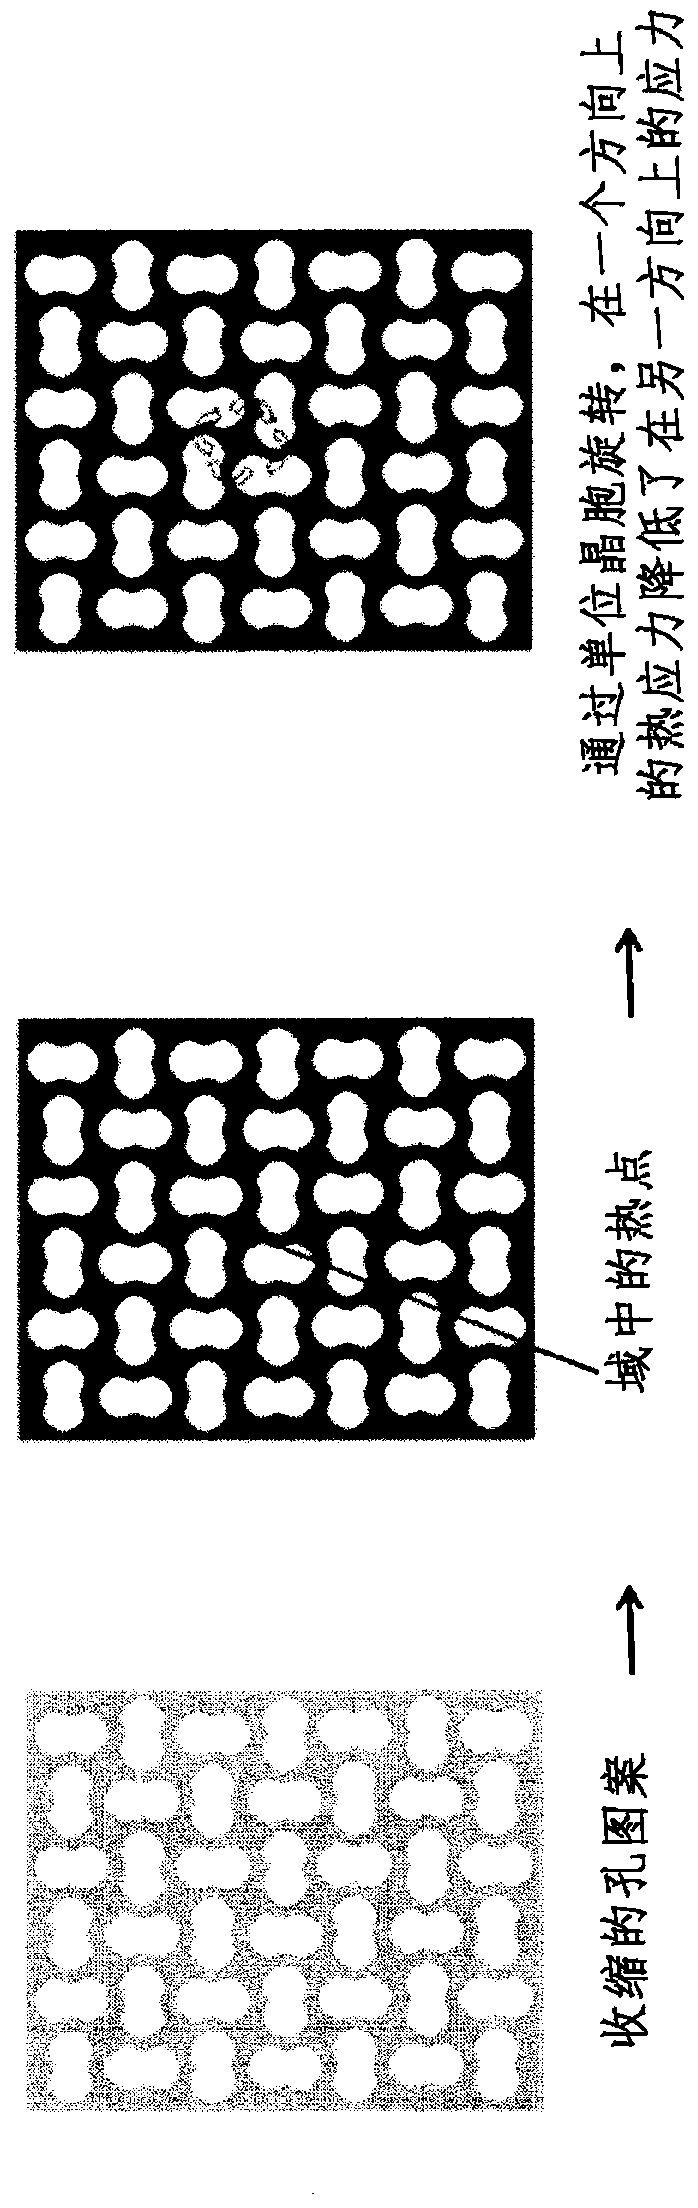 Pore ​​structure with repeating pattern of elongated pores